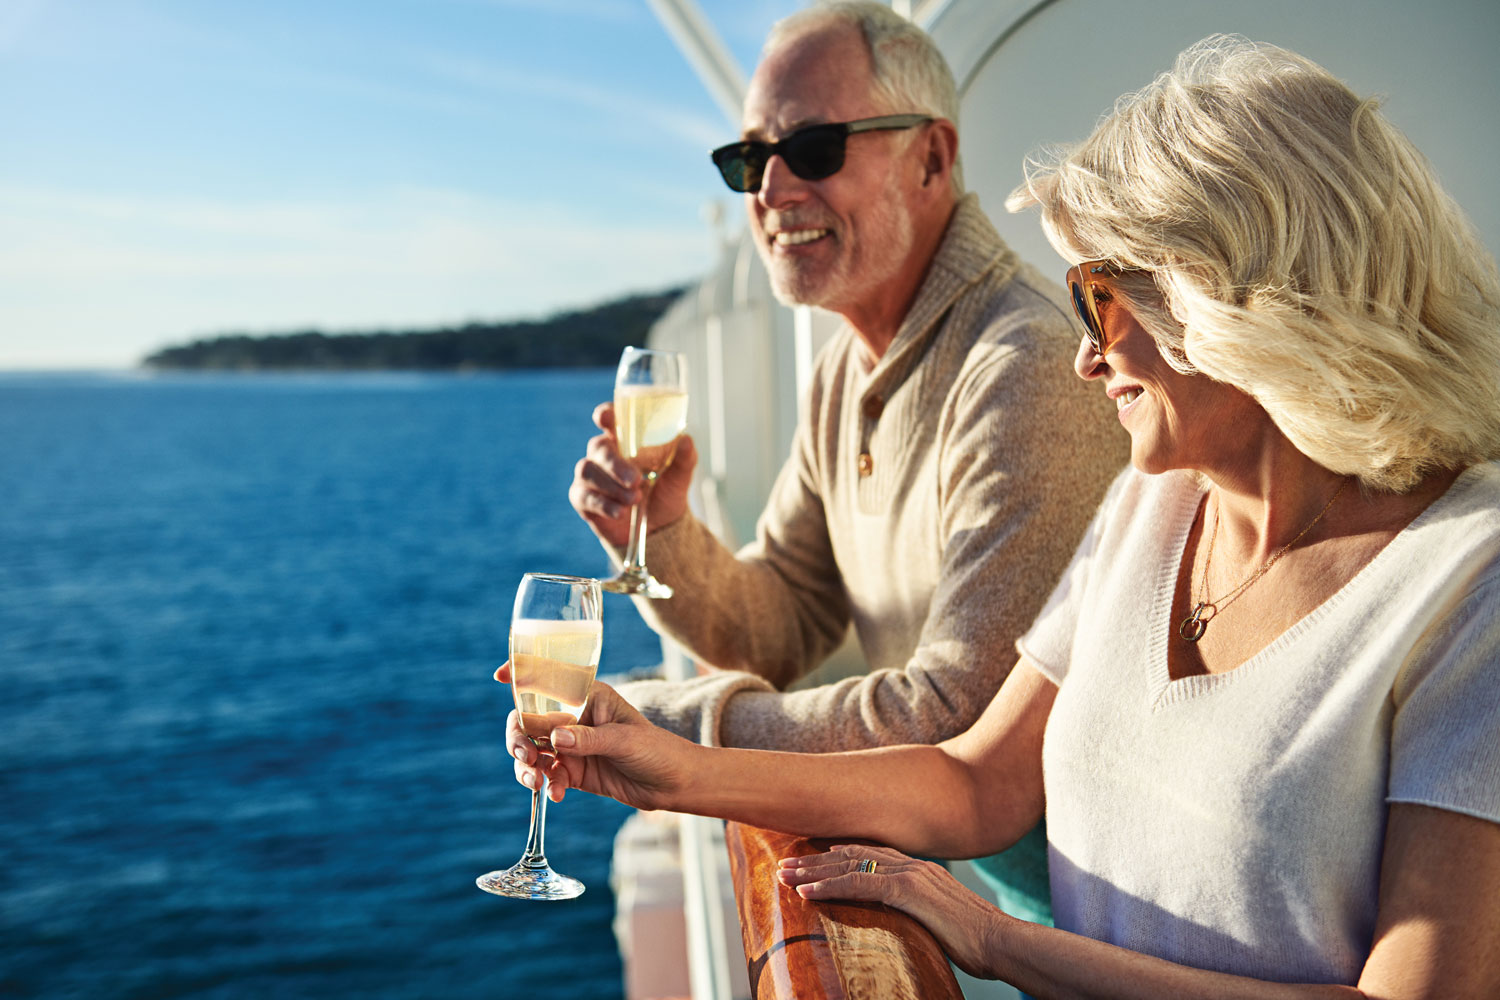 Cruise ship retirement - is it cheaper?